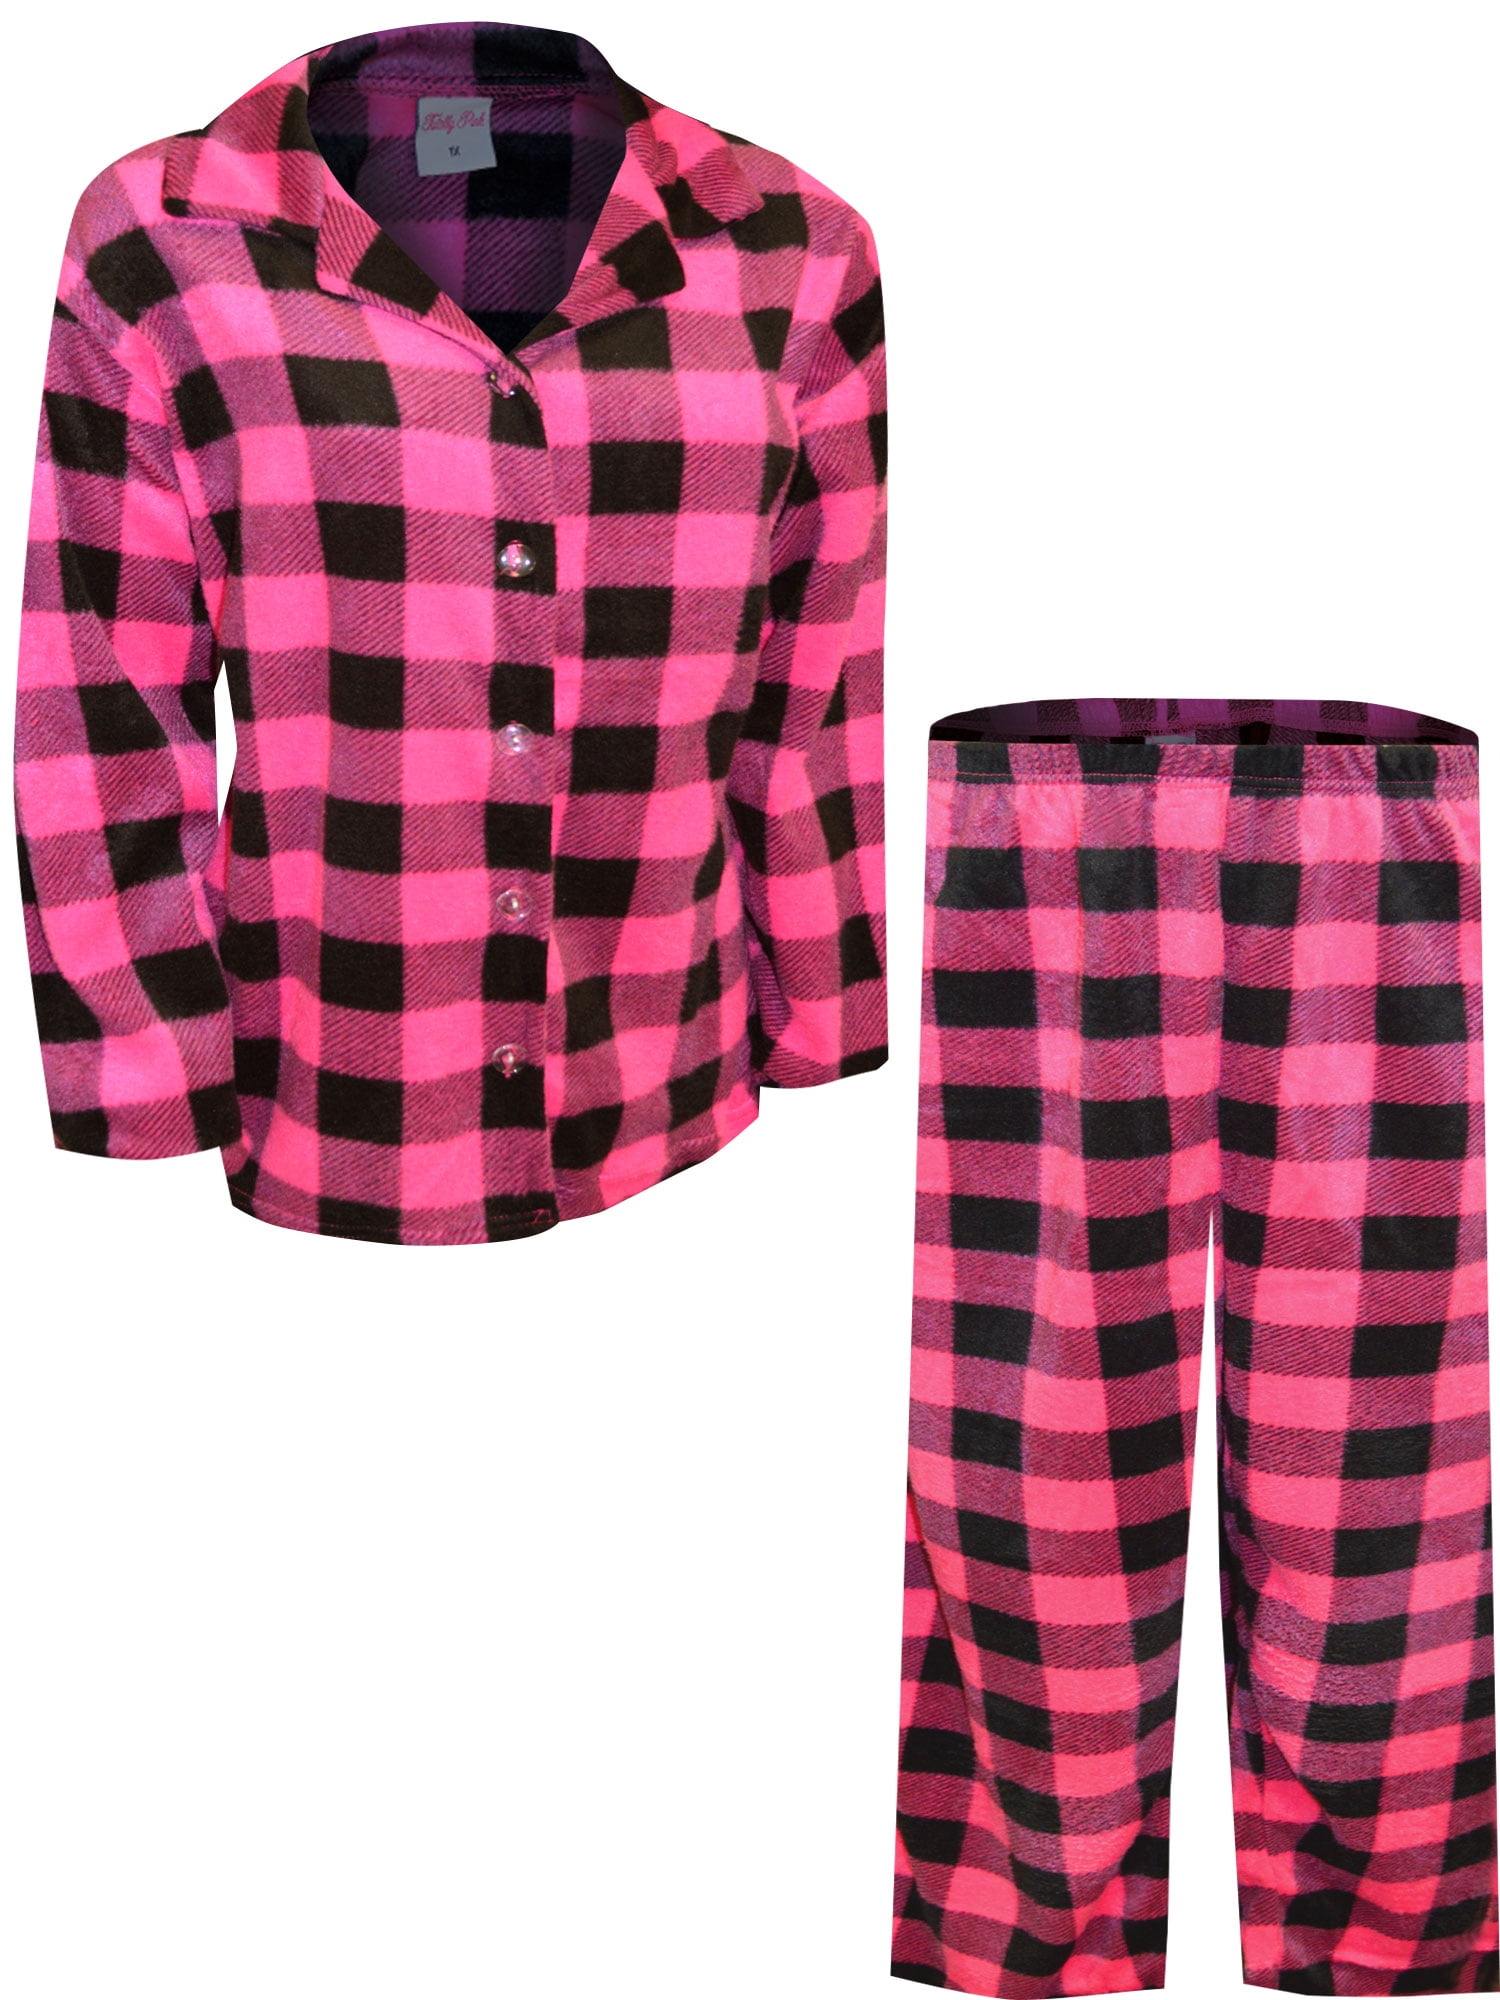 Totally Pink! Womens Hot Pink and Black Buffalo Plaid Plus Size ...